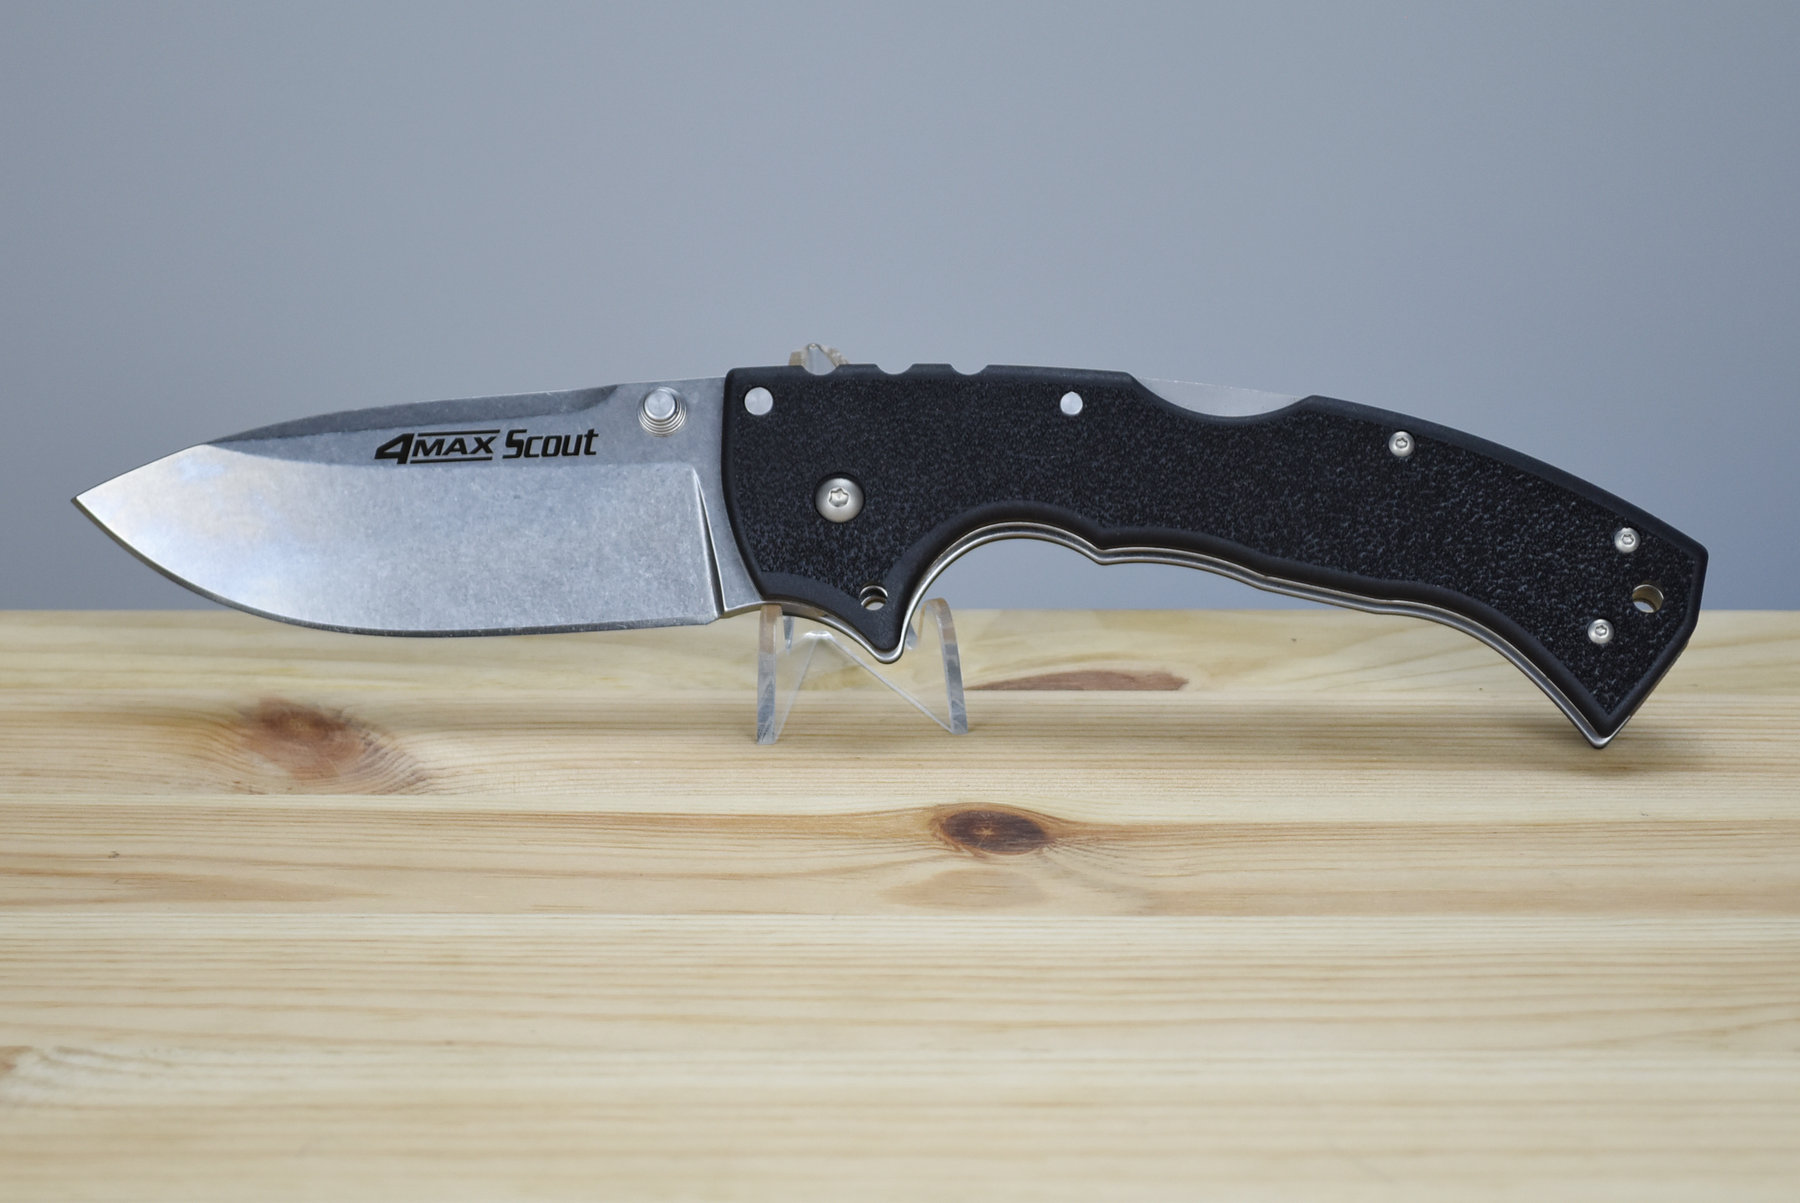 Cold Steel 4-Max Scout Folding Blade (AUS10A)